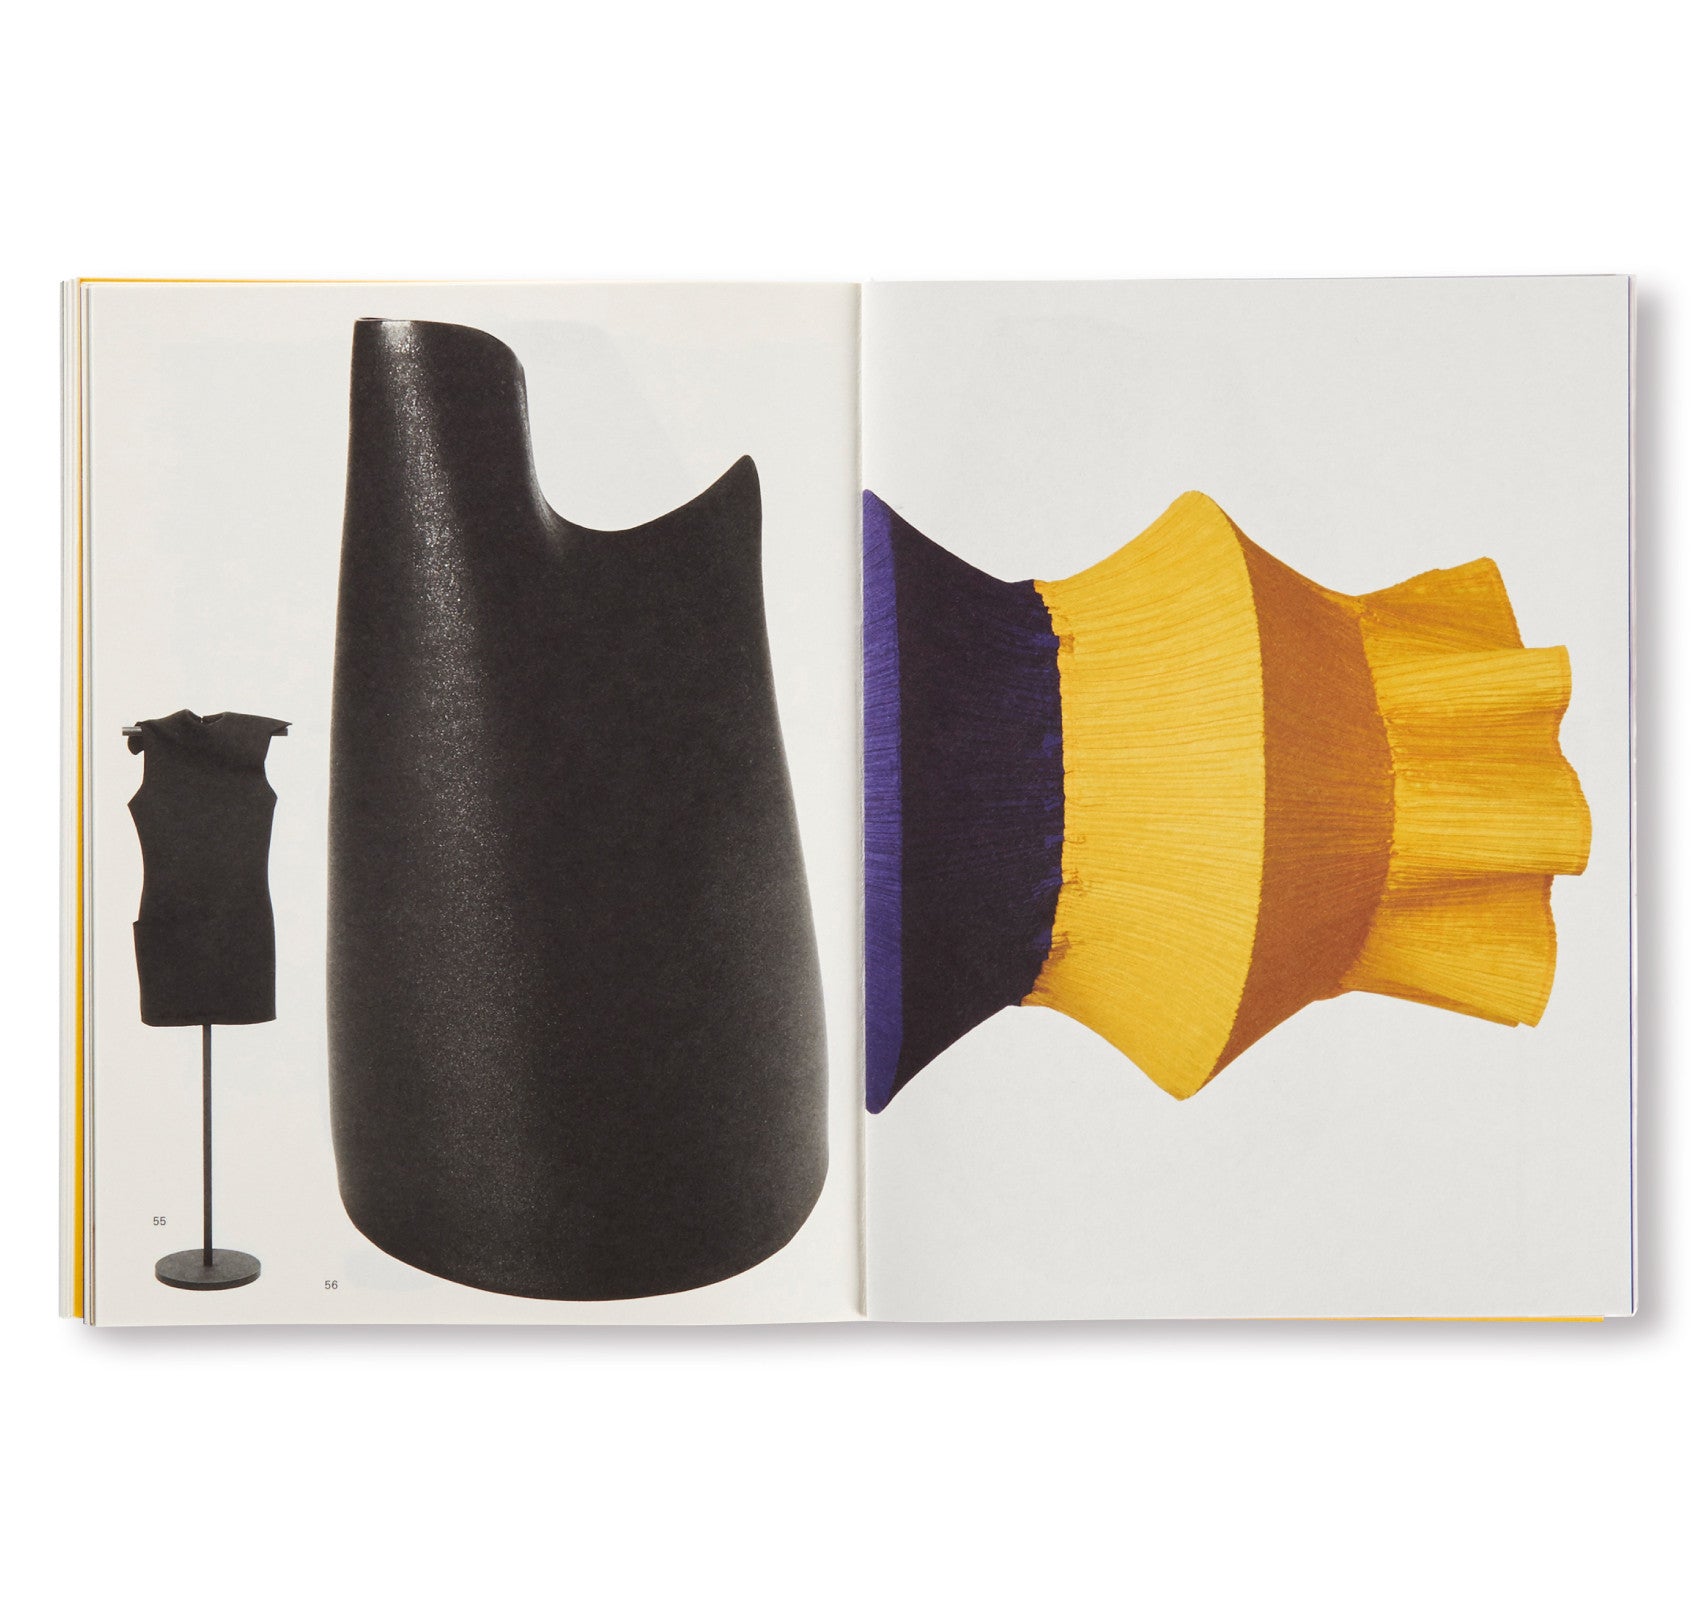 DISOBEDIENT BODIES  by JW Anderson